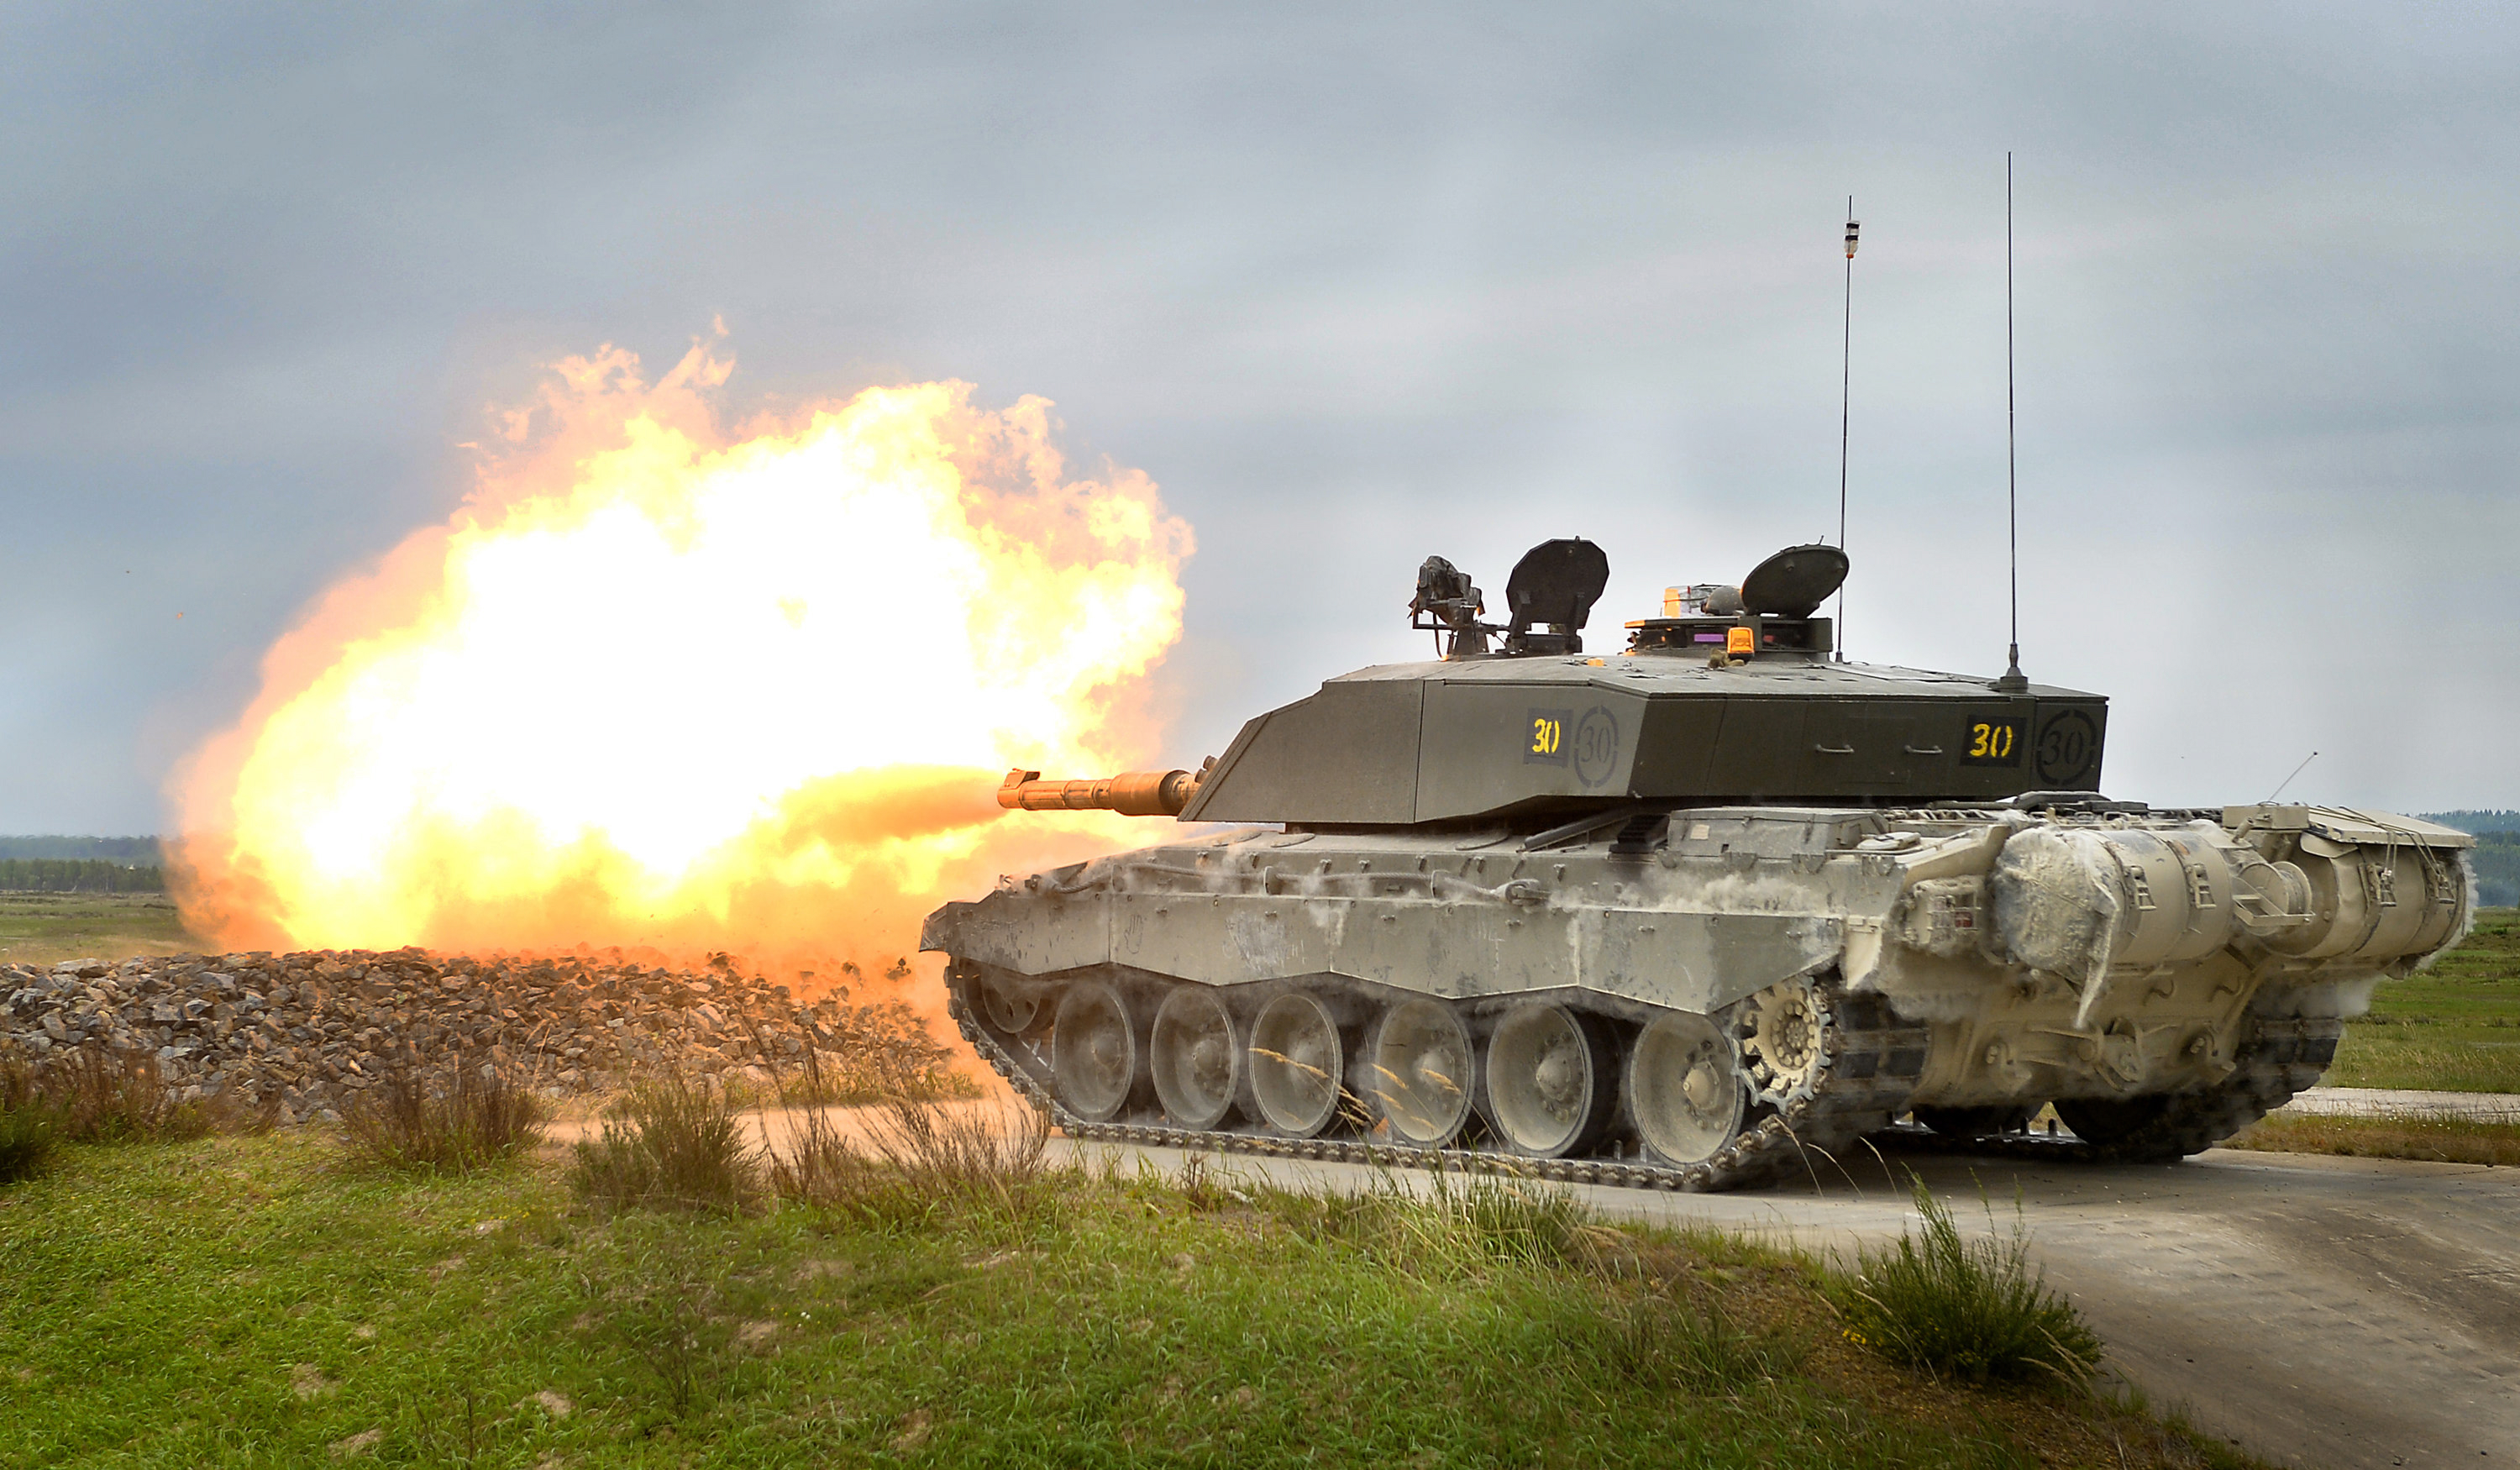 Challenger 2 Tank Live Firing During Exercise